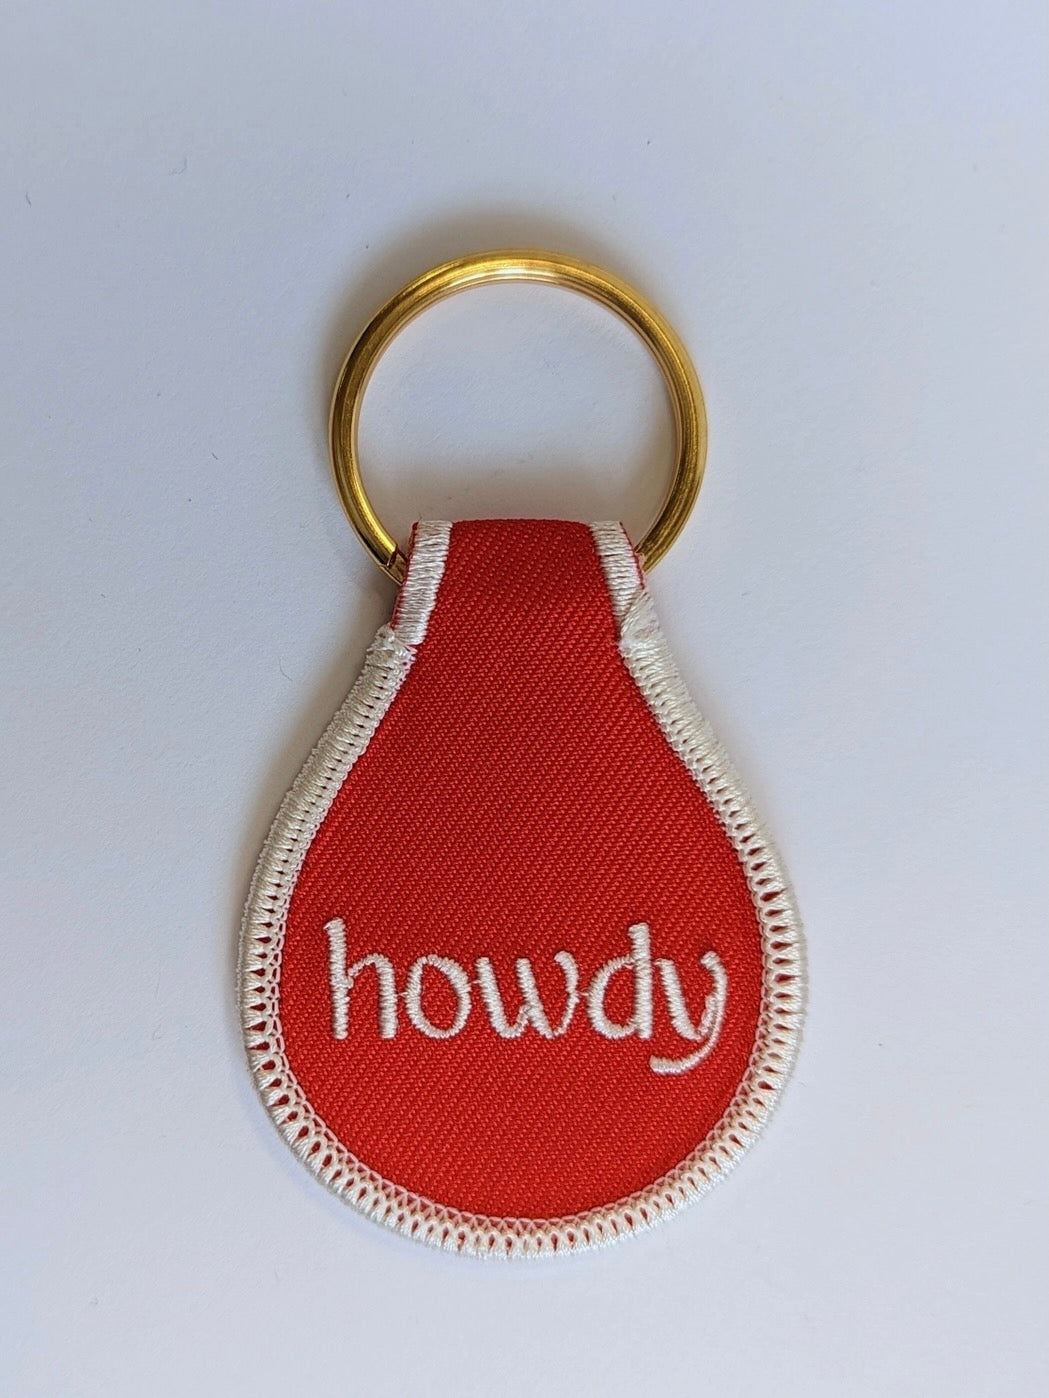 HOWDY EMBROIDERED KEYCHAIN